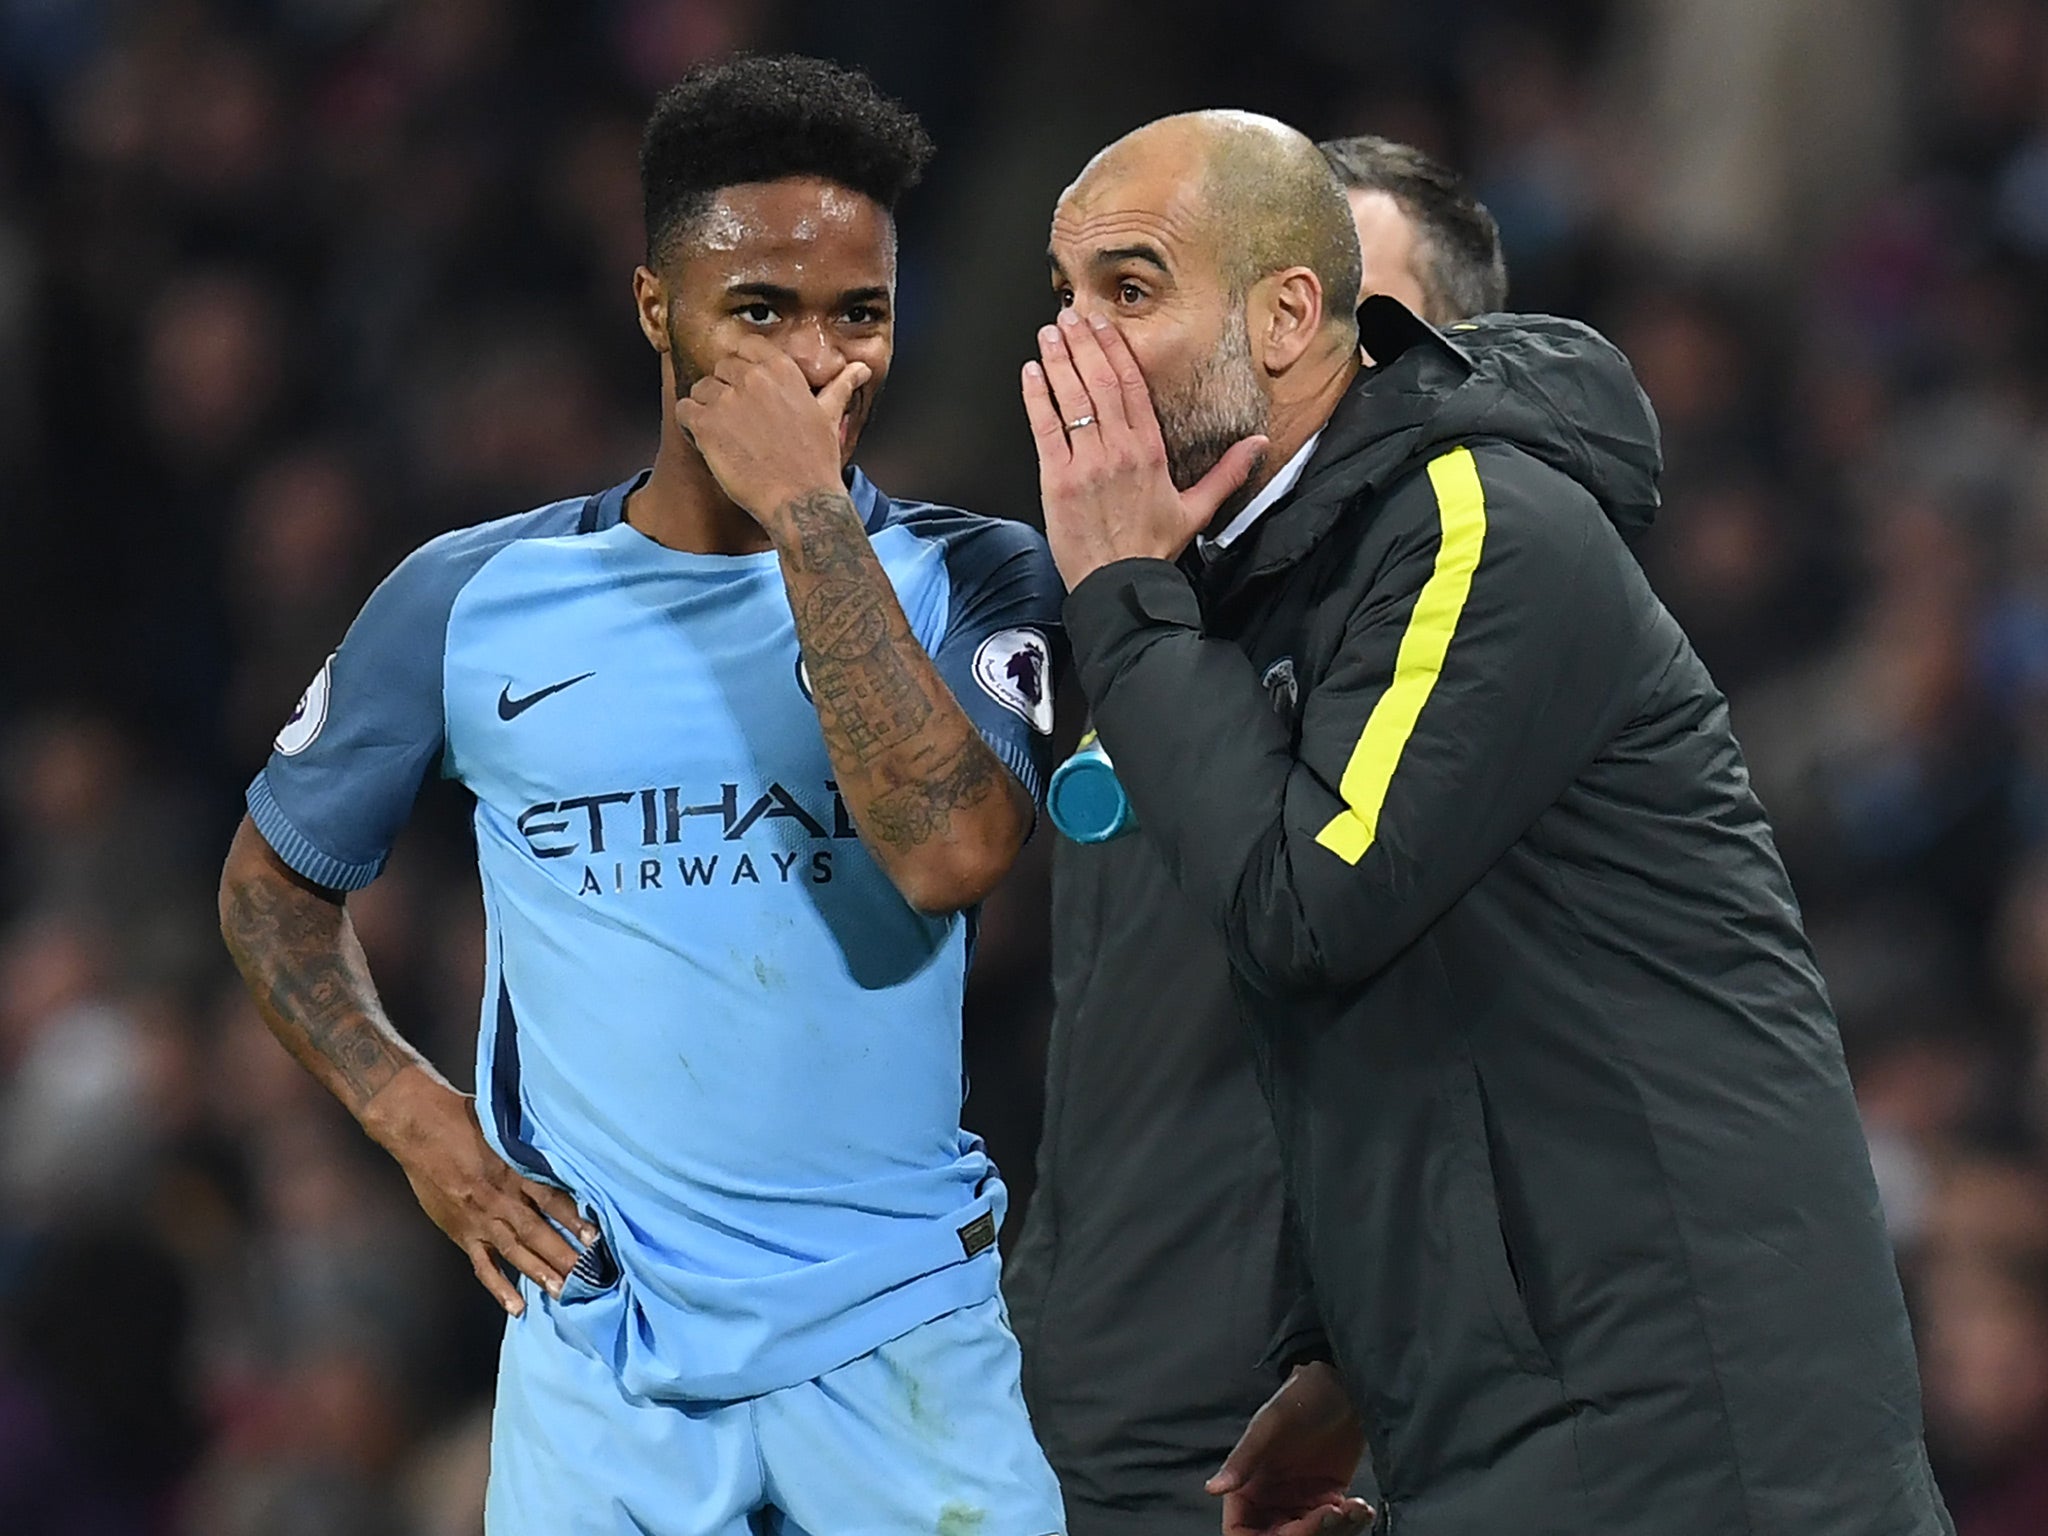 Guardiola is confident that Sterling can regain his sparkling early season form